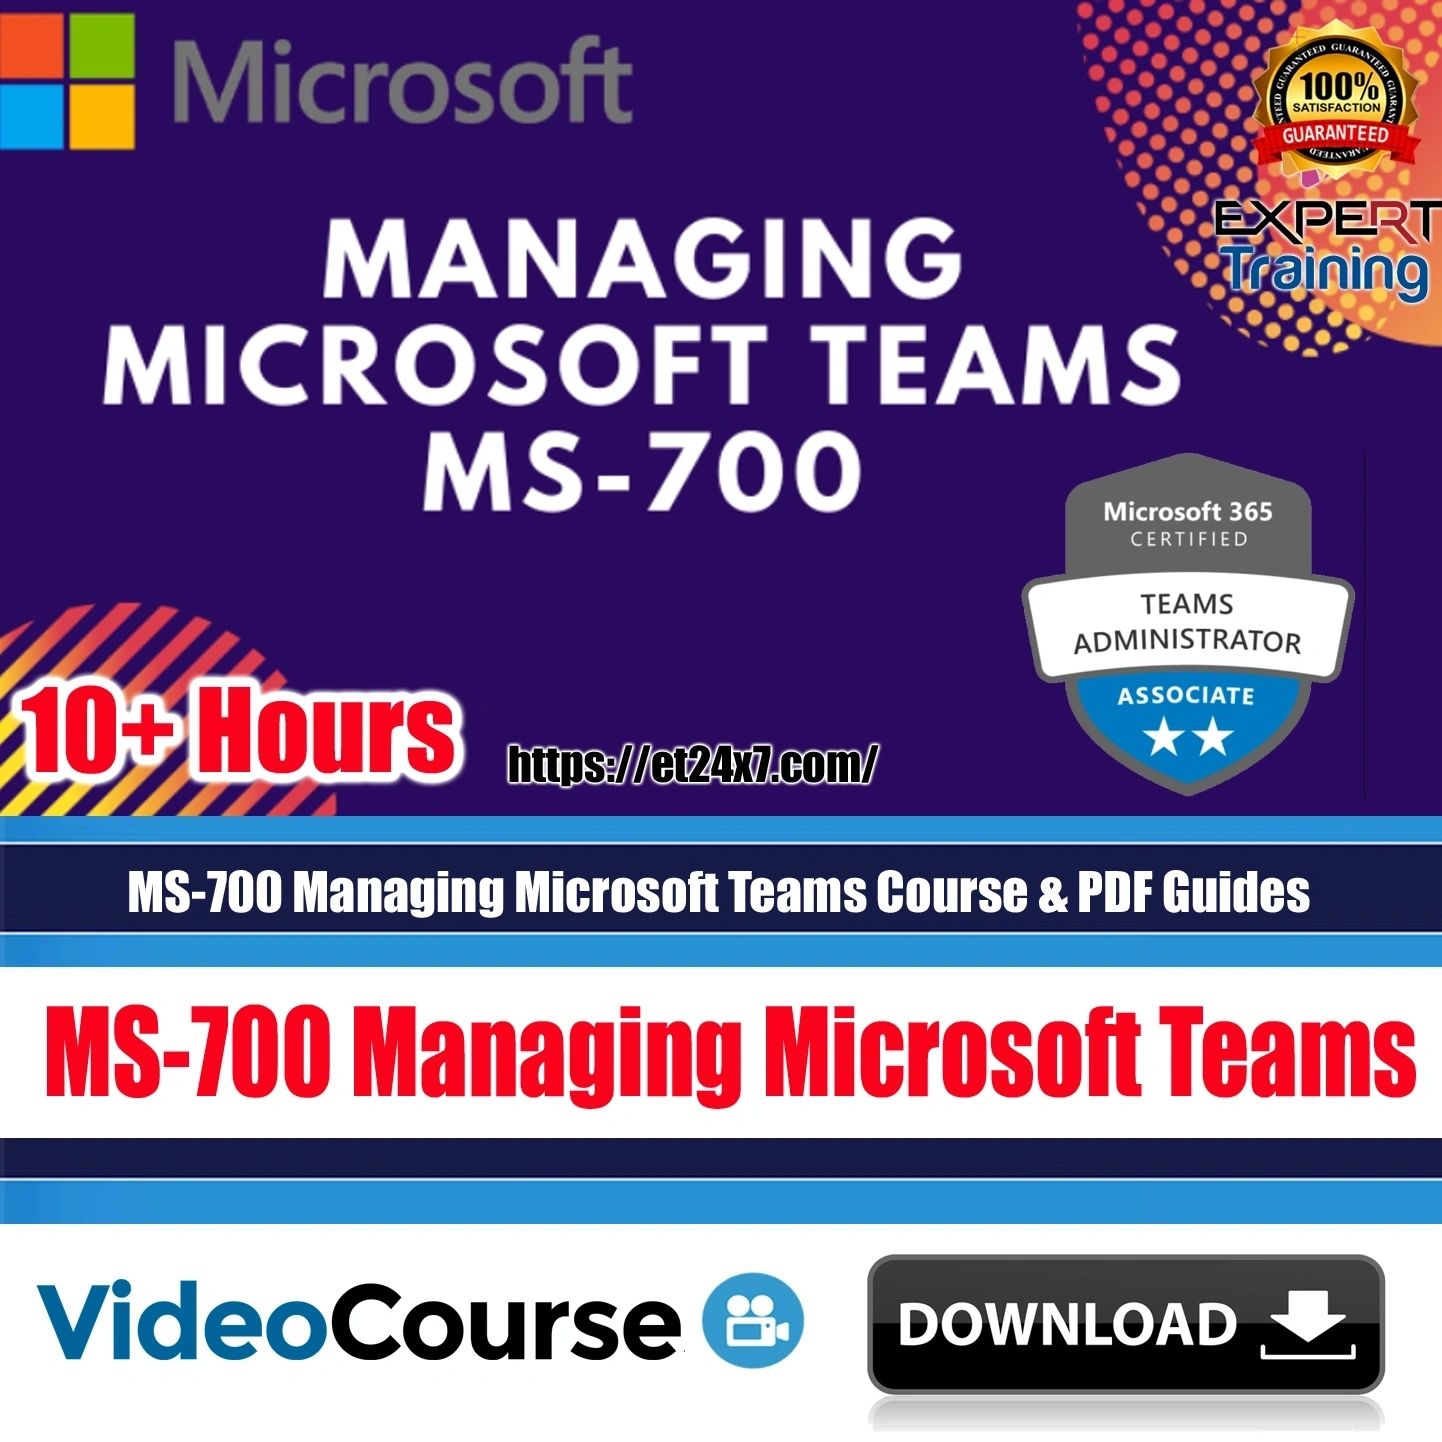 MS-700 Managing Microsoft Teams Course & PDF Guides